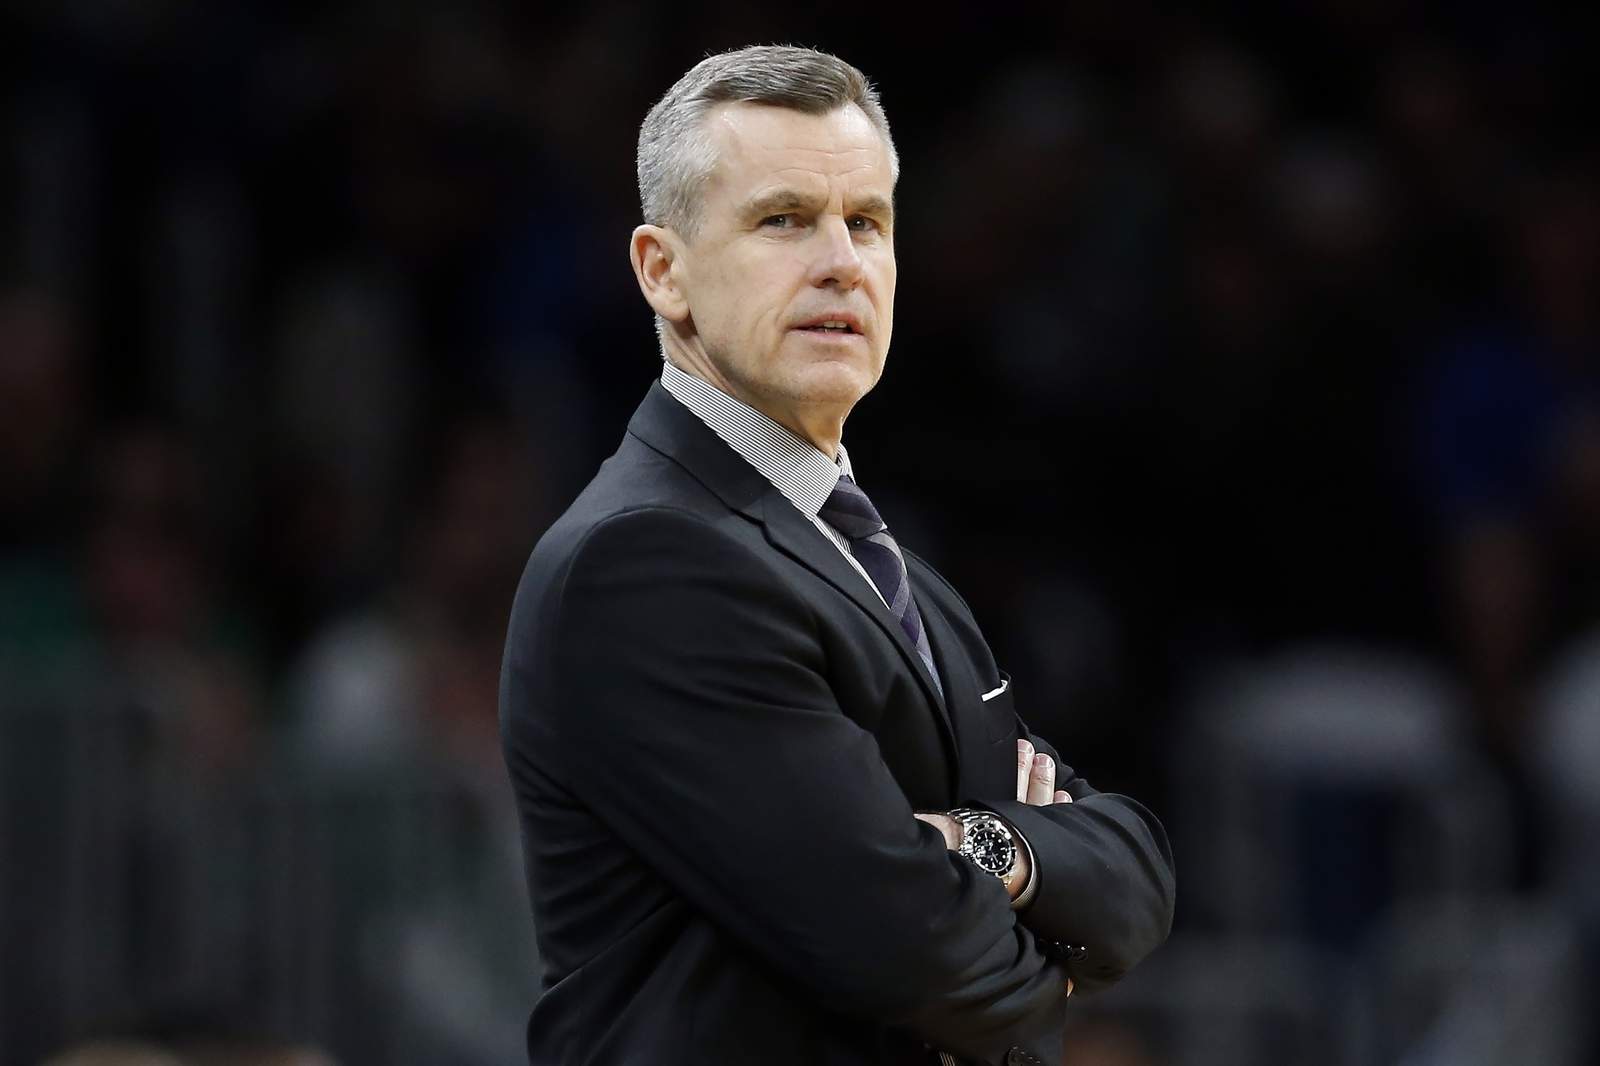 For Donovan, job with Bulls 'came out of left field'